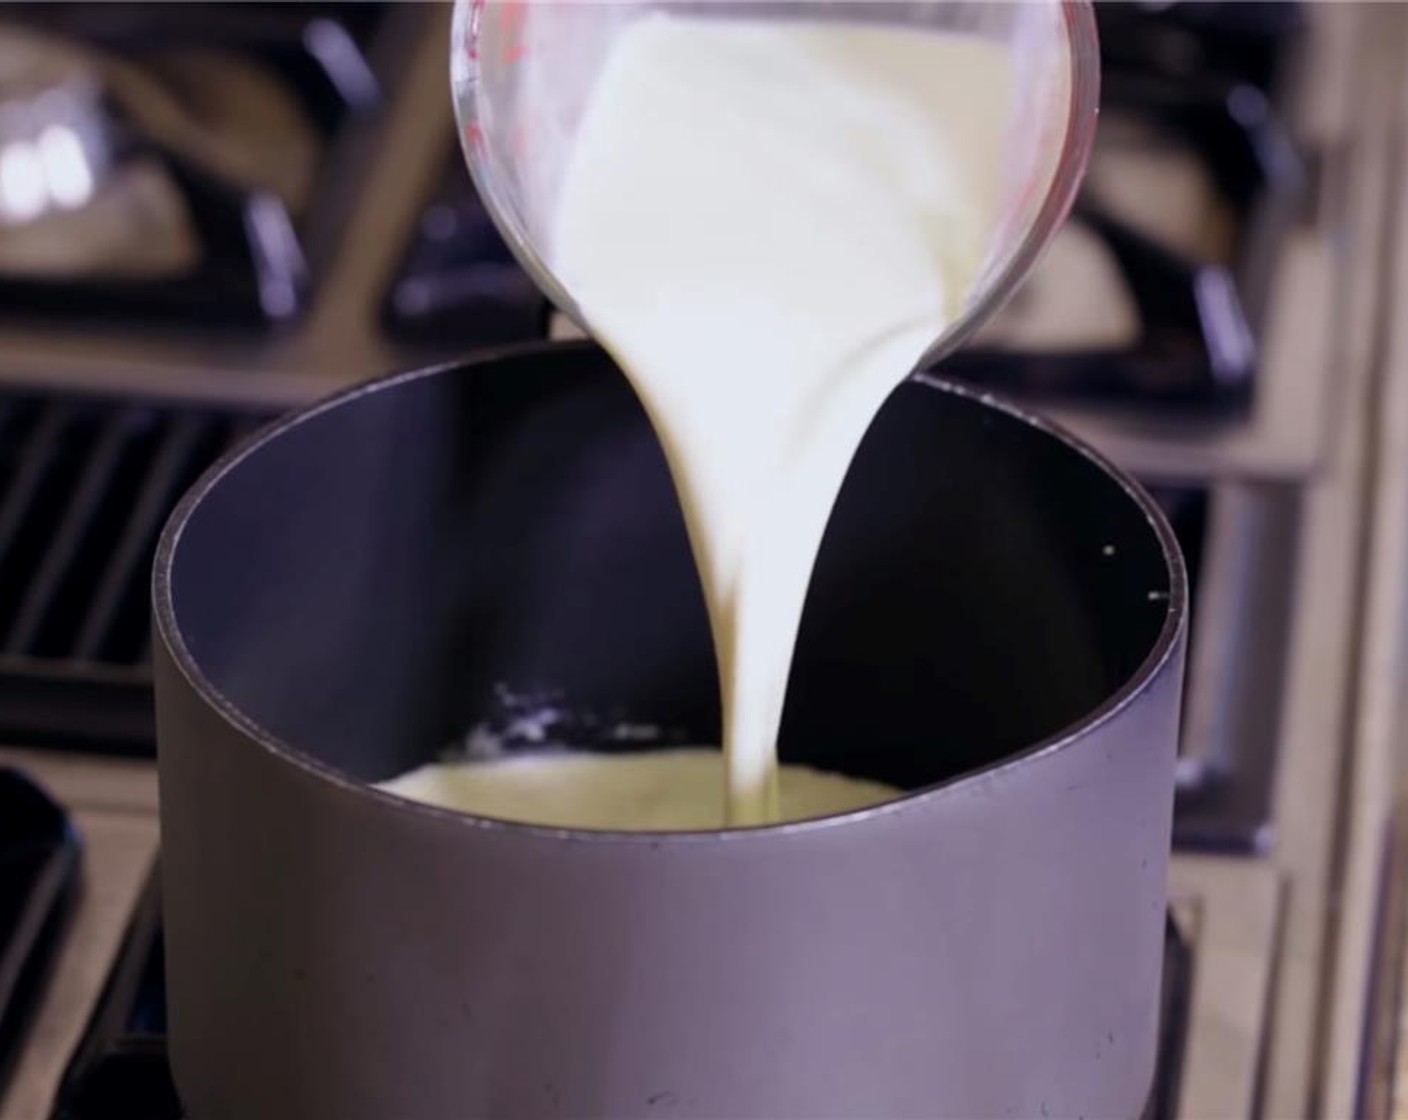 step 2 Combine Heavy Cream (1 1/4 cups), Non-Fat Milk (1/3 cup), and half of the Granulated Sugar (1/4 cup) in a medium saucepan. Heat mixture over medium-low heat, stirring constantly until the sugar has dissolved. Do not boil.